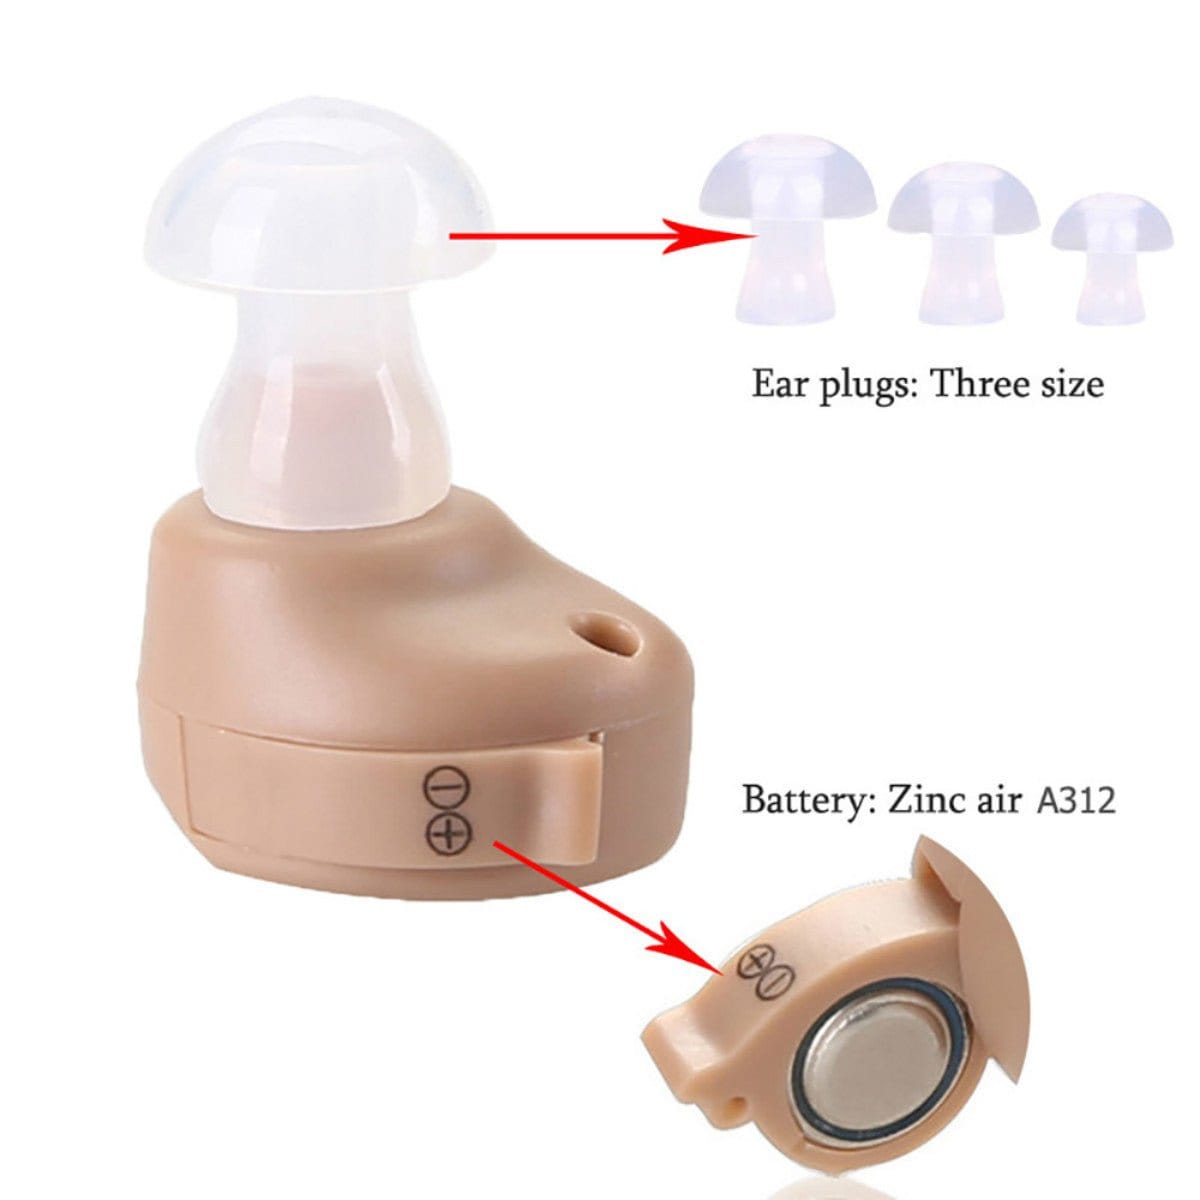 Two Sets Of Hearing Aid Sound Amplifier Hearing Aid Headphones - CLASSY CLOSET BOUTIQUETwo Sets Of Hearing Aid Sound Amplifier Hearing Aid HeadphoneseperloD85B6A04DEDC459A94FCBB12BE07E9A2